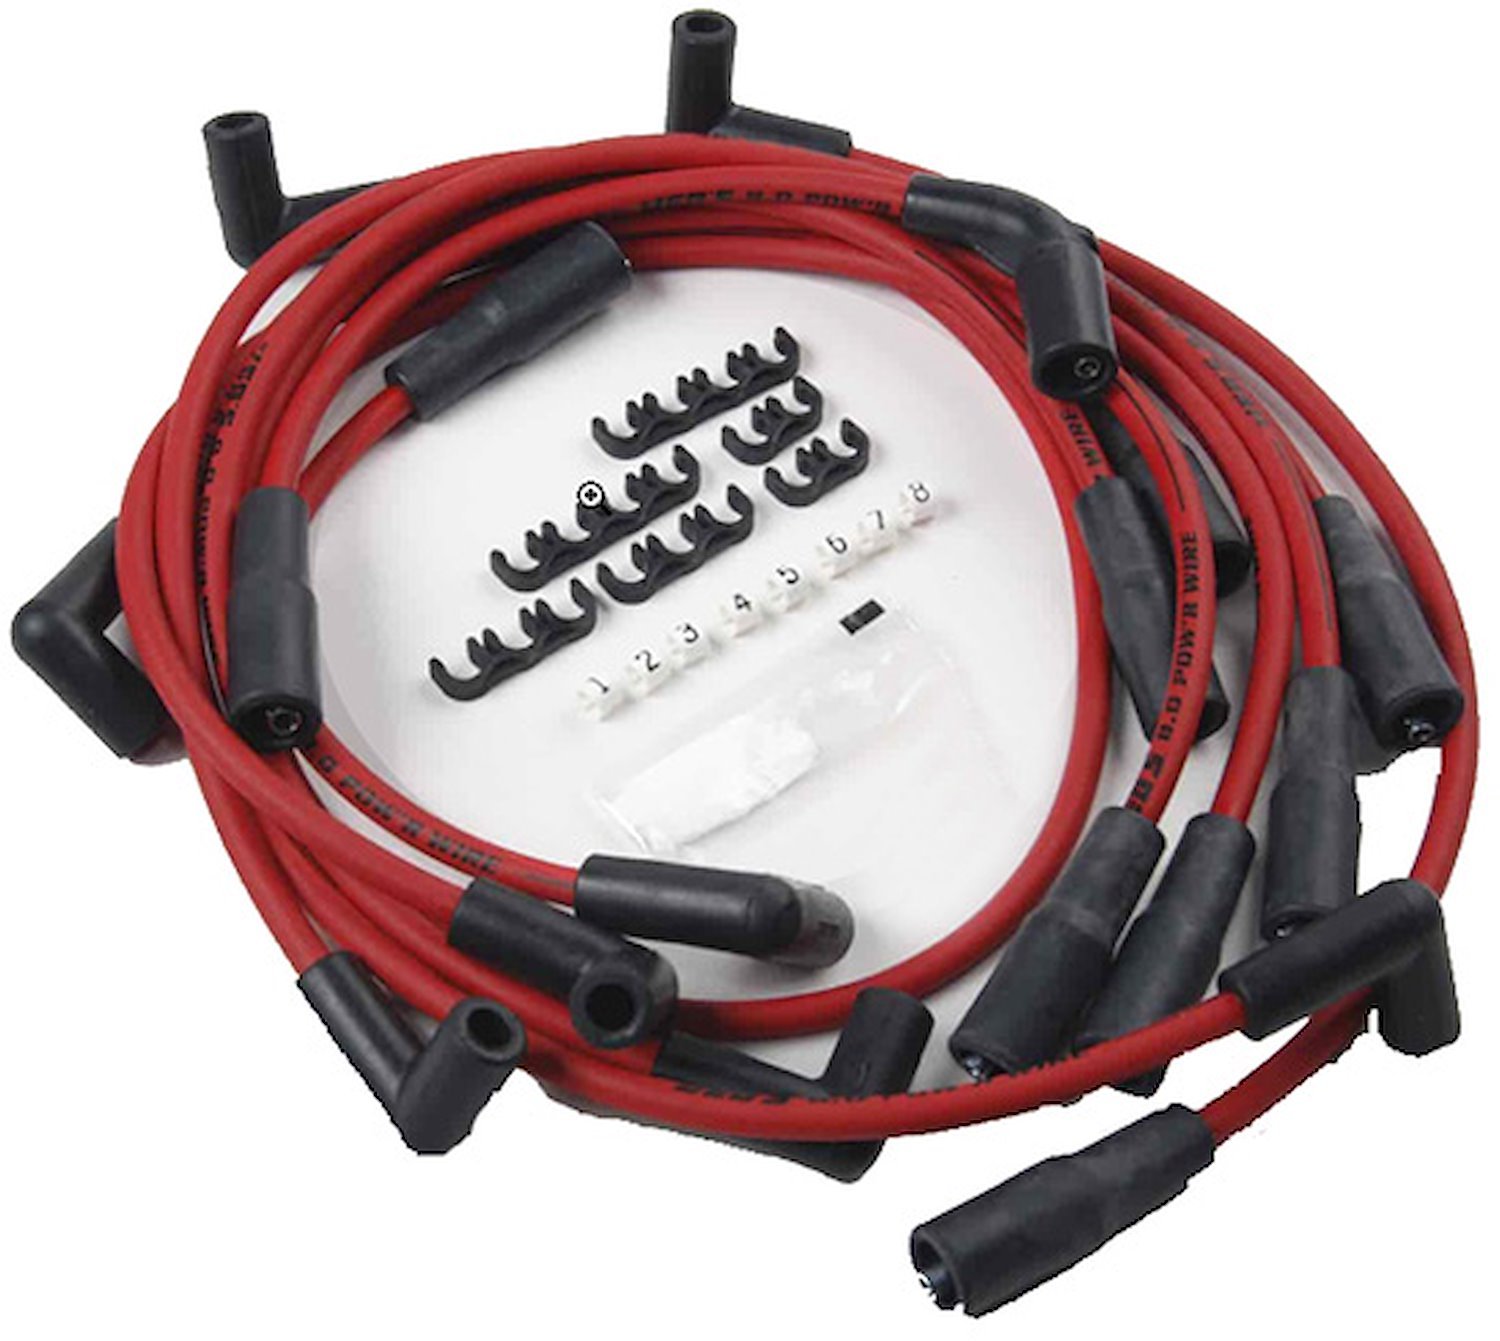 8.0mm Red Hot Pow'r Wires 1996-2000 Small Block Chevy Truck 5.7L Vortec